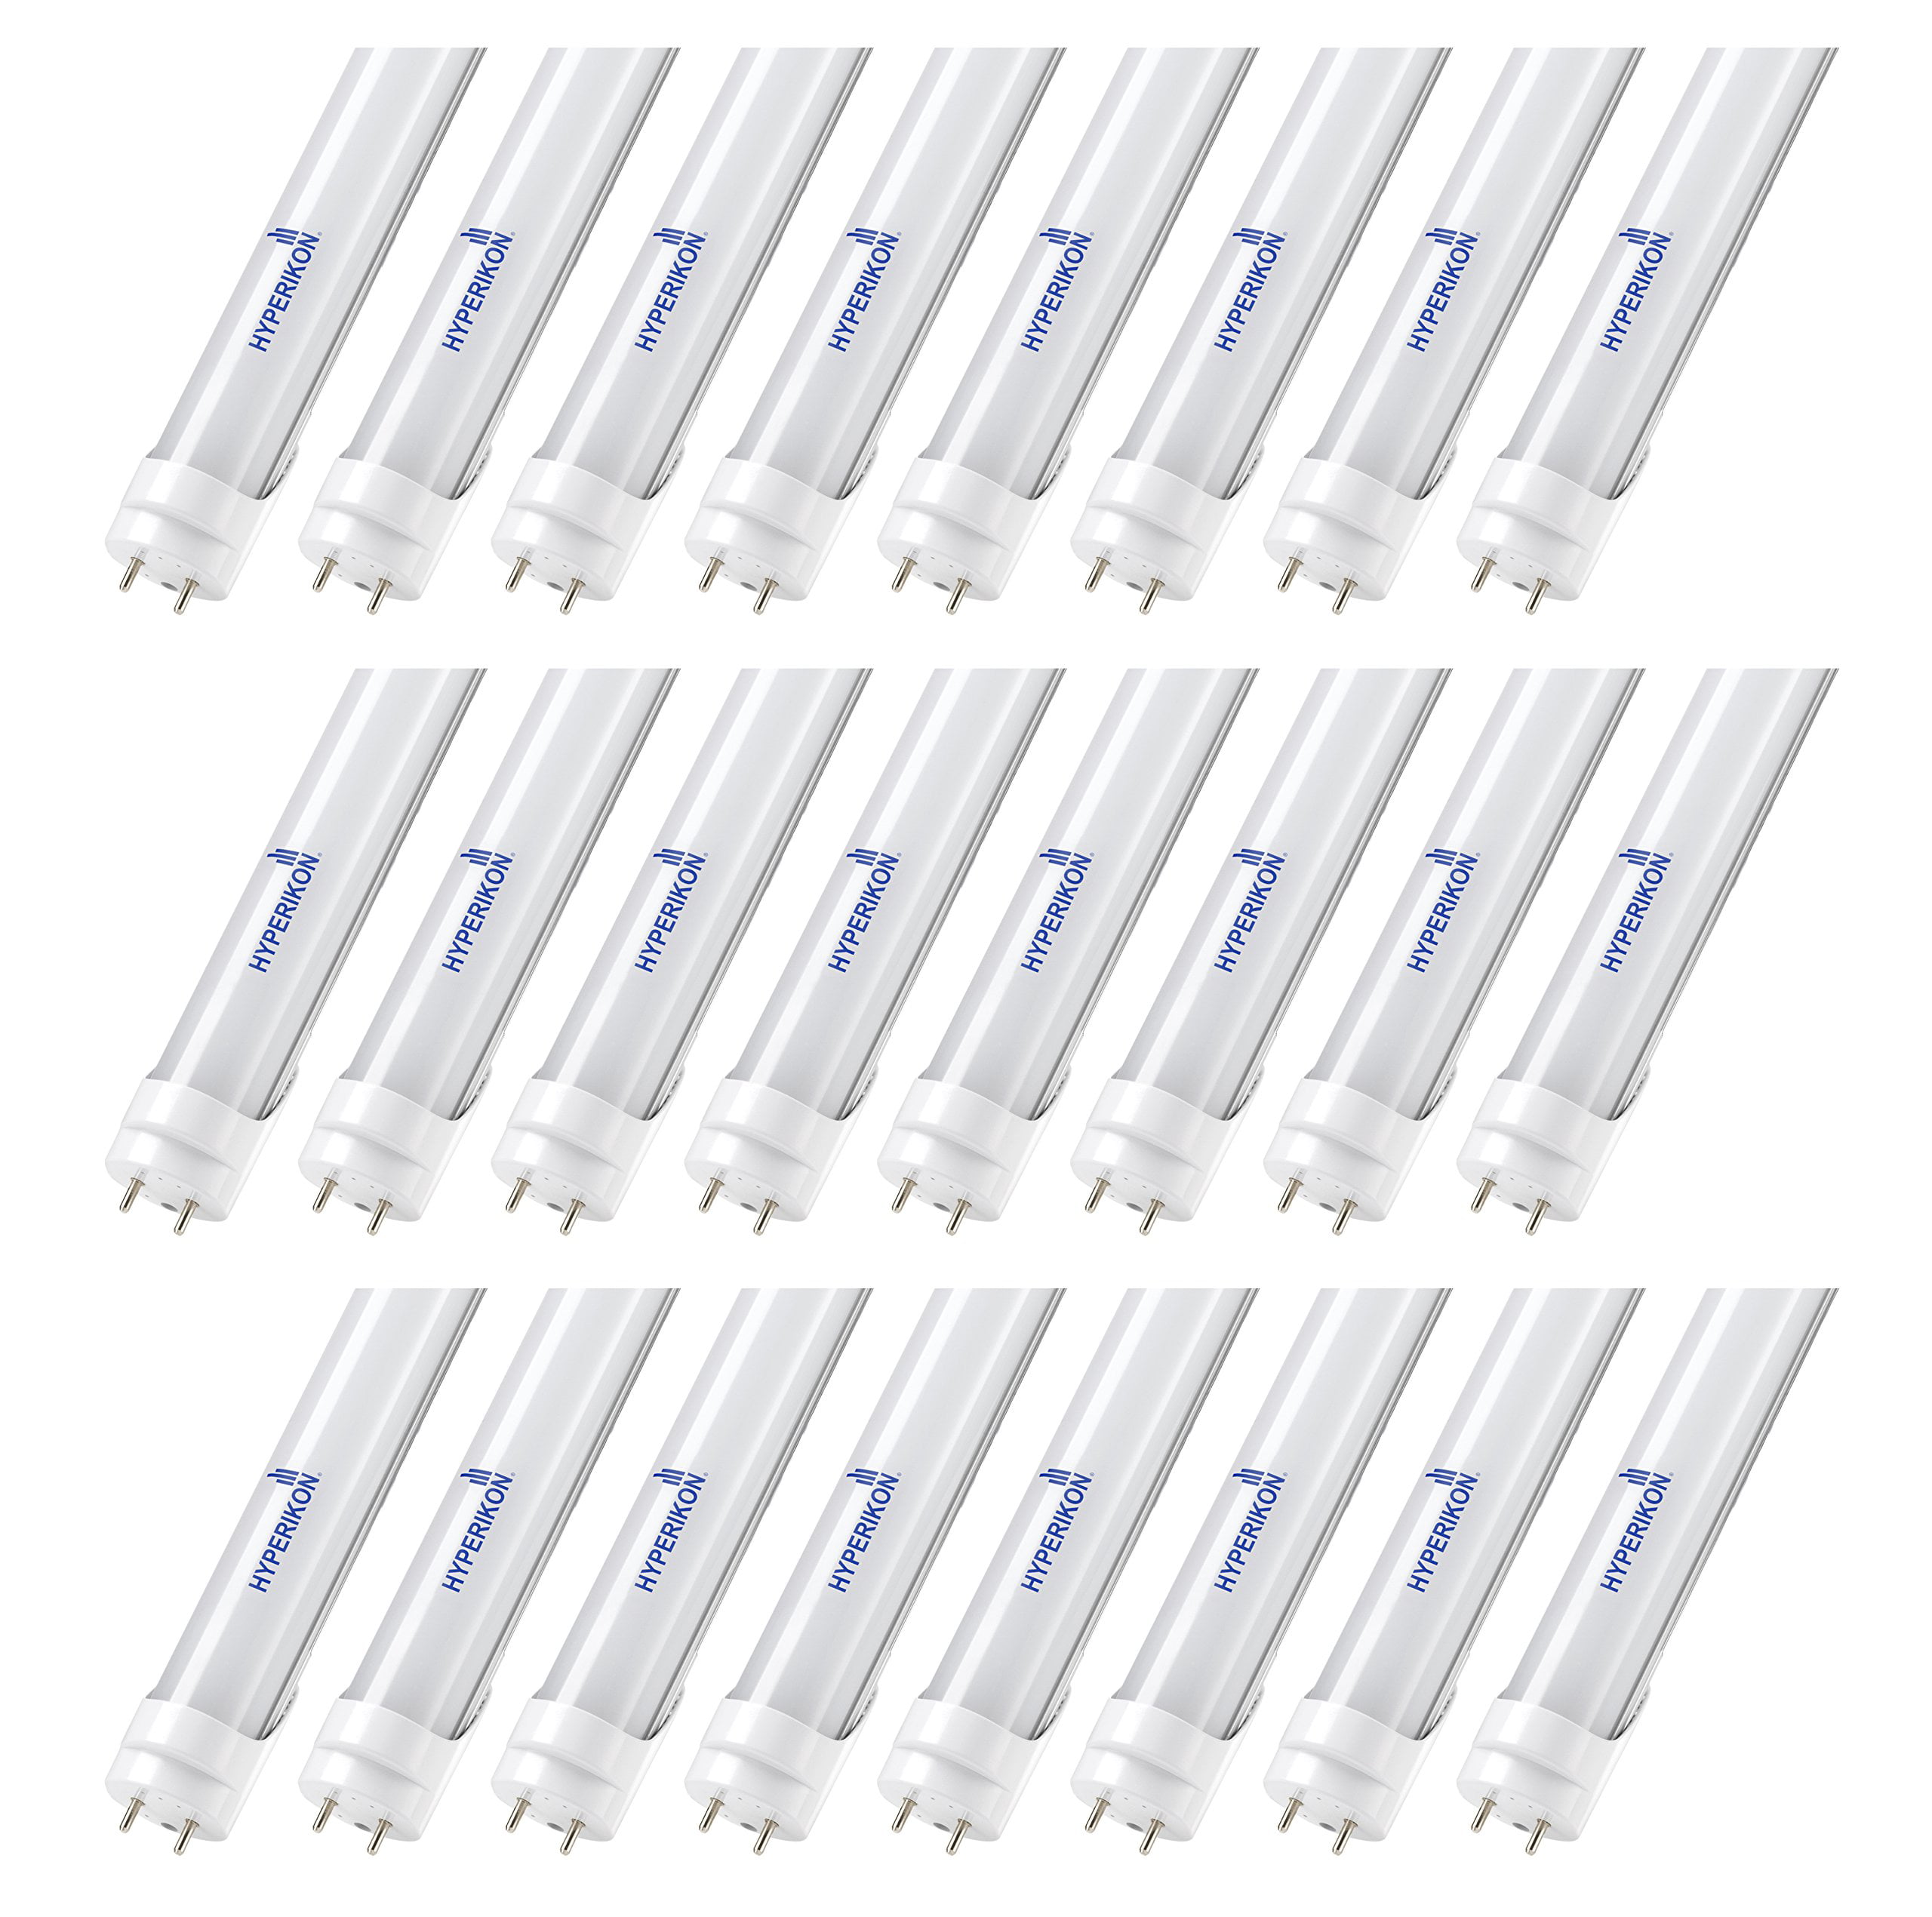 Super Bright White Clear Cover 40W equivalent T8/T10/T12 LED Light Tube Pack of 12 Dual-End Powered Works with and without T8 ballast Hyperikon 6000K DLC-qualified - 2200 Lumens 4FT 18W 